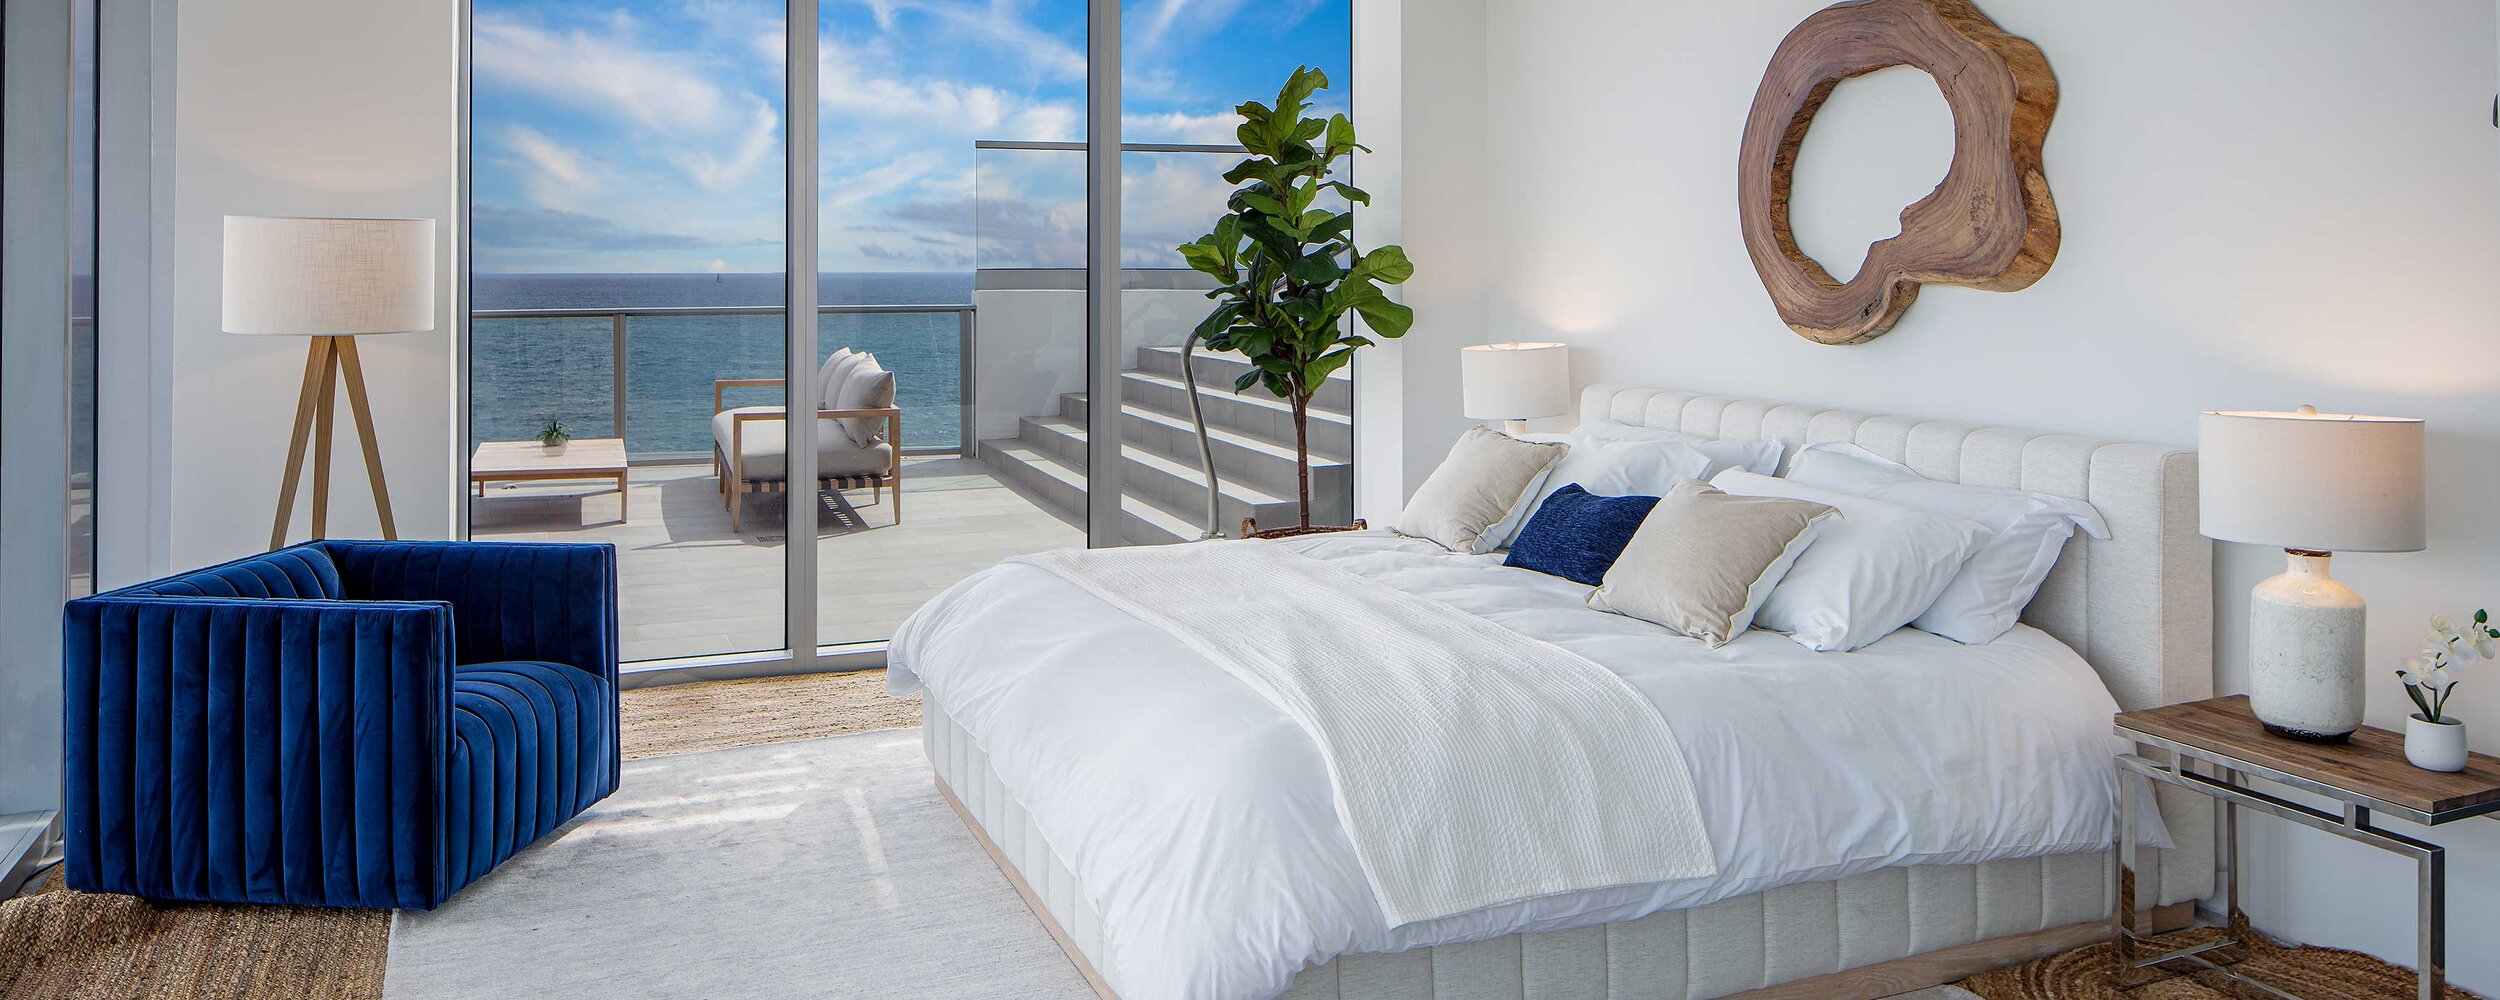 20 Coastal Bedroom Ideas to Transport You to the Shore